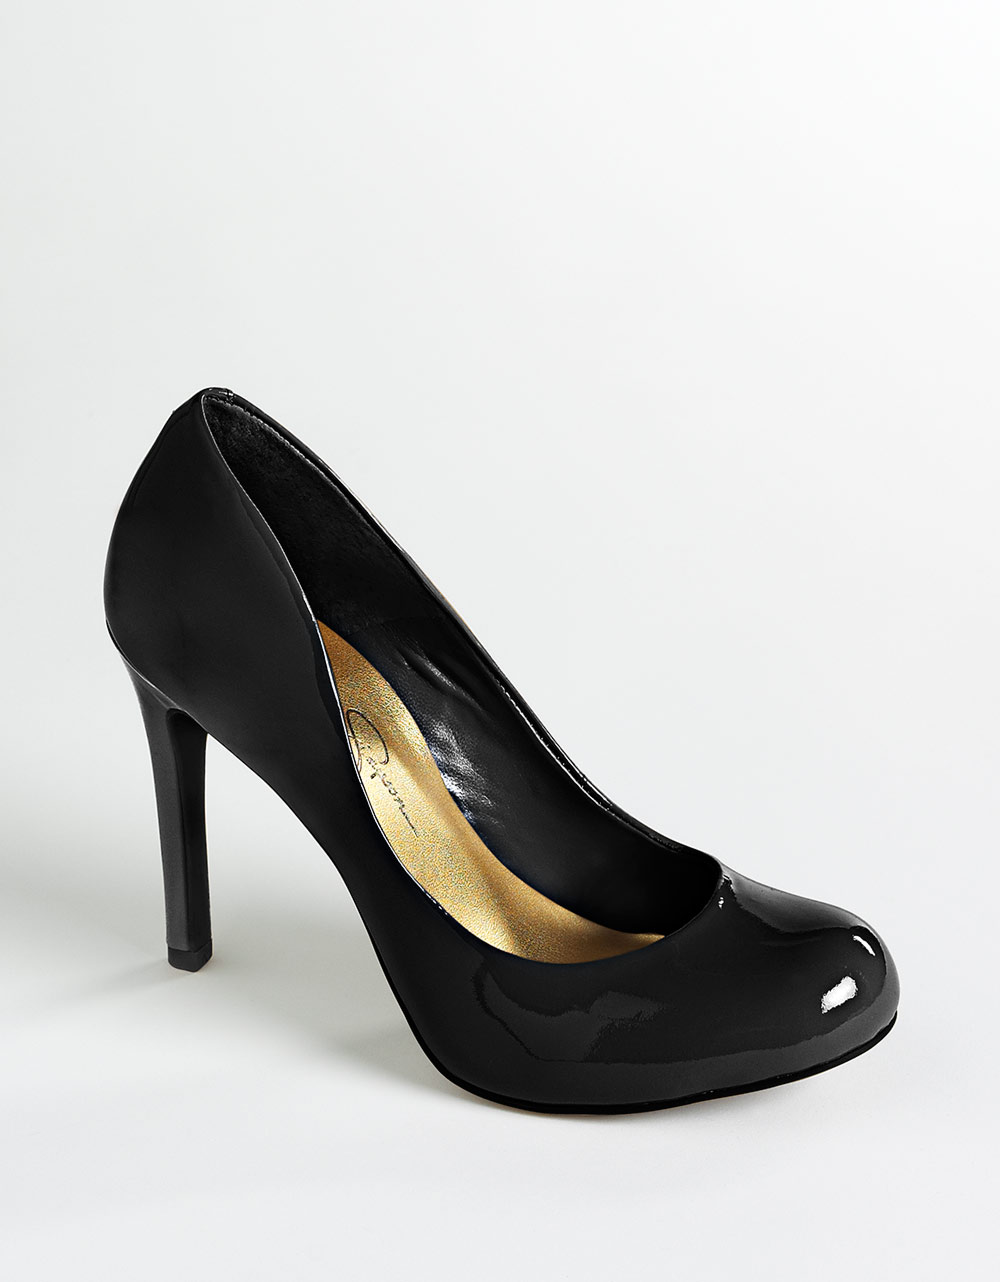 Jessica simpson Calie Patent Leather Pumps in Black | Lyst